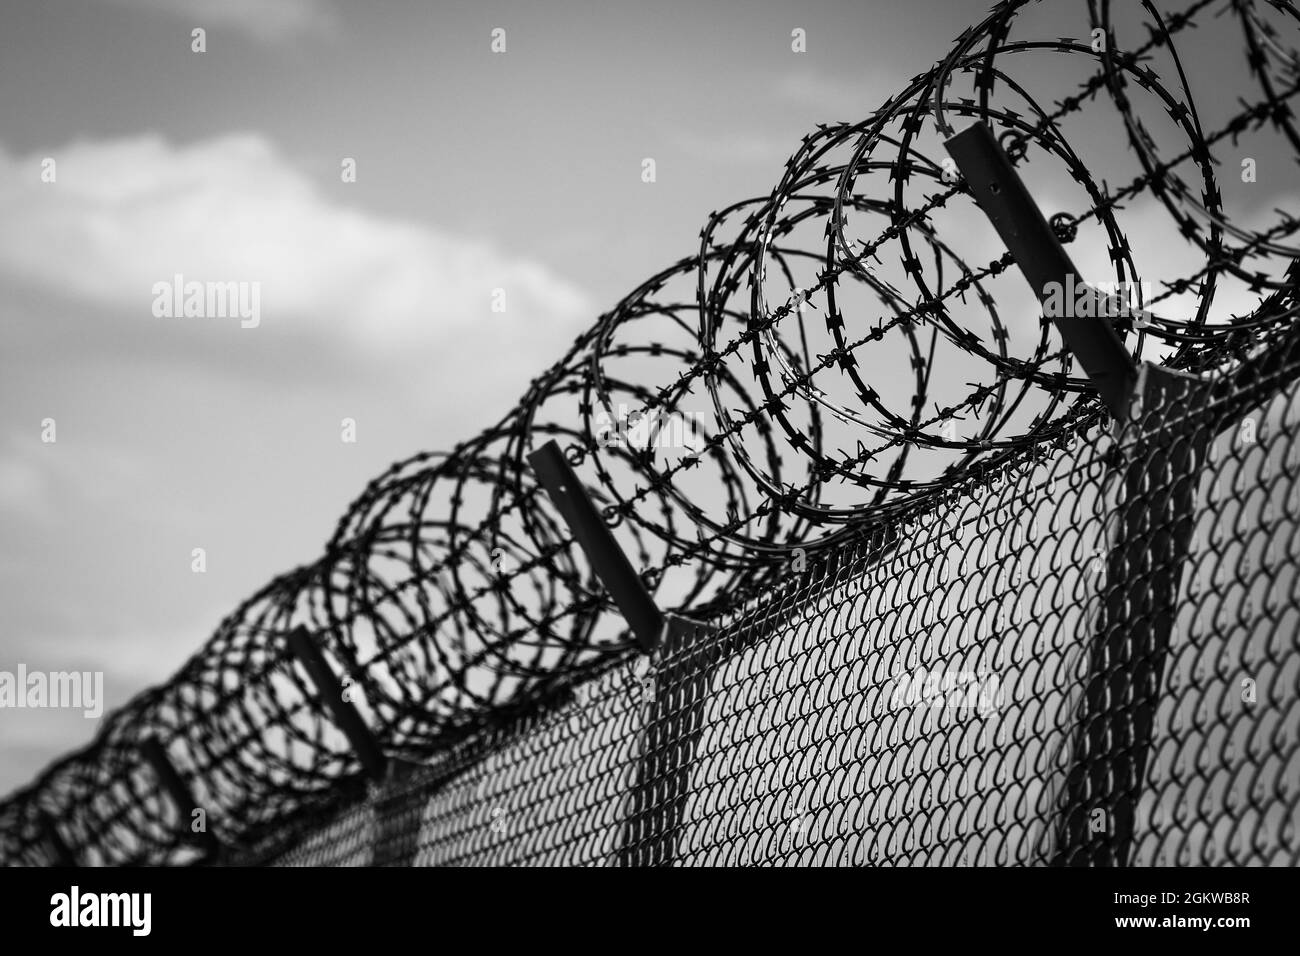 Barbed wire on top of metal mesh netting fence enclosing airport against cloudy sky Stock Photo